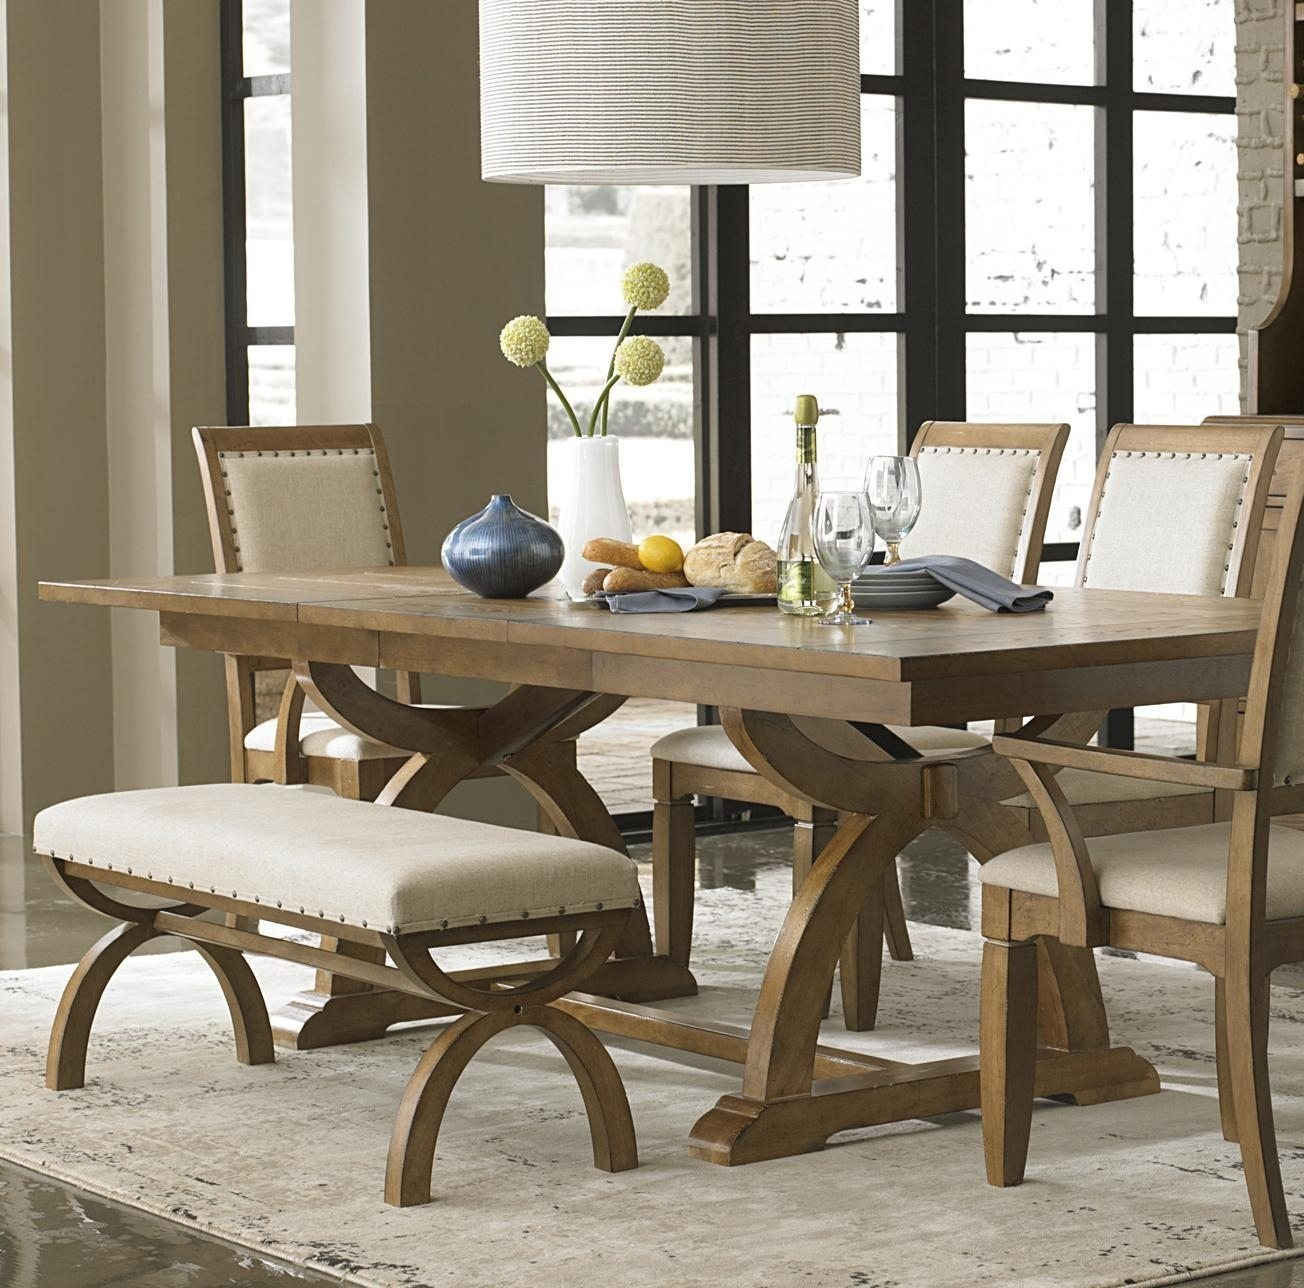 Dining Room Dining Room Table Bench Set Macys Dining Table intended for measurements 1304 X 1288